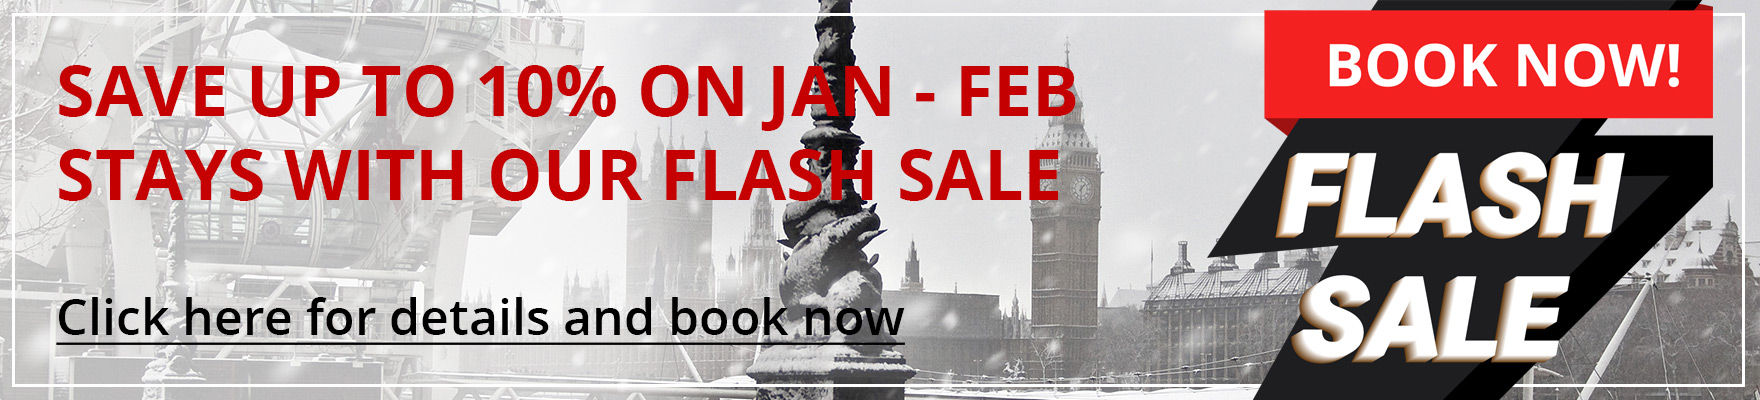 Save Up To 10% With Our Last-Minute Flash Sale